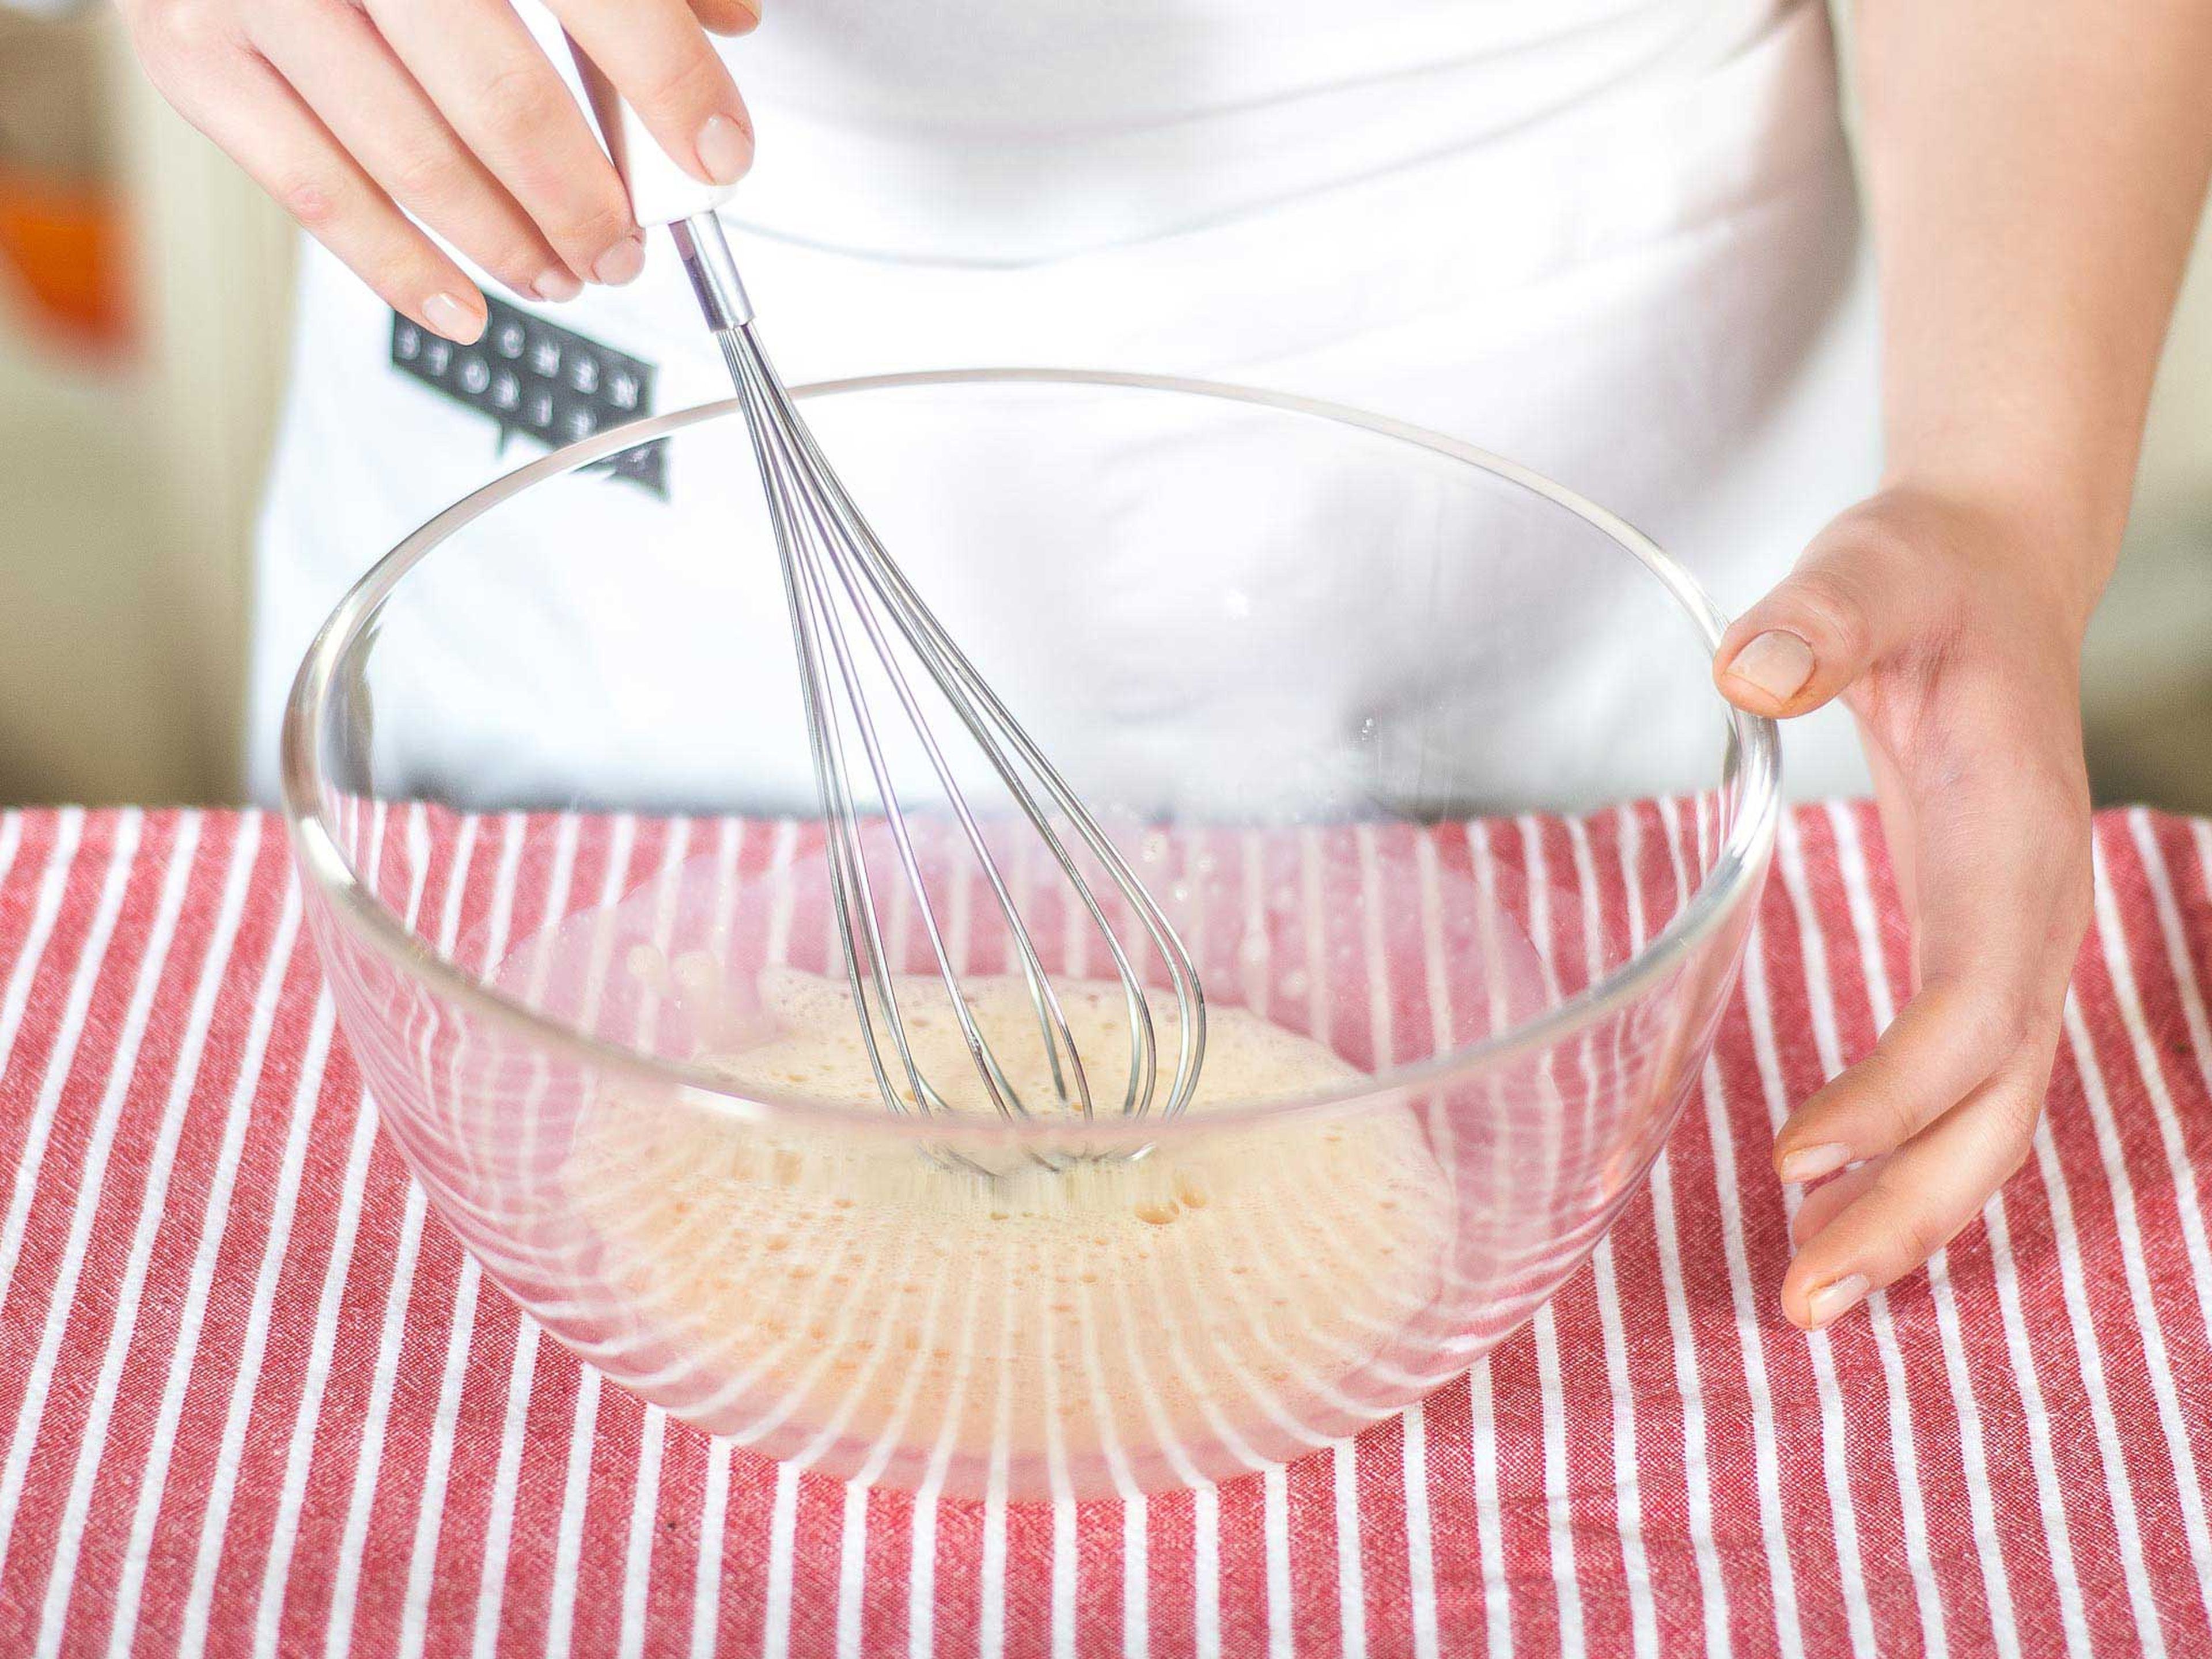 Whisk egg in a mixing bowl until foamy.